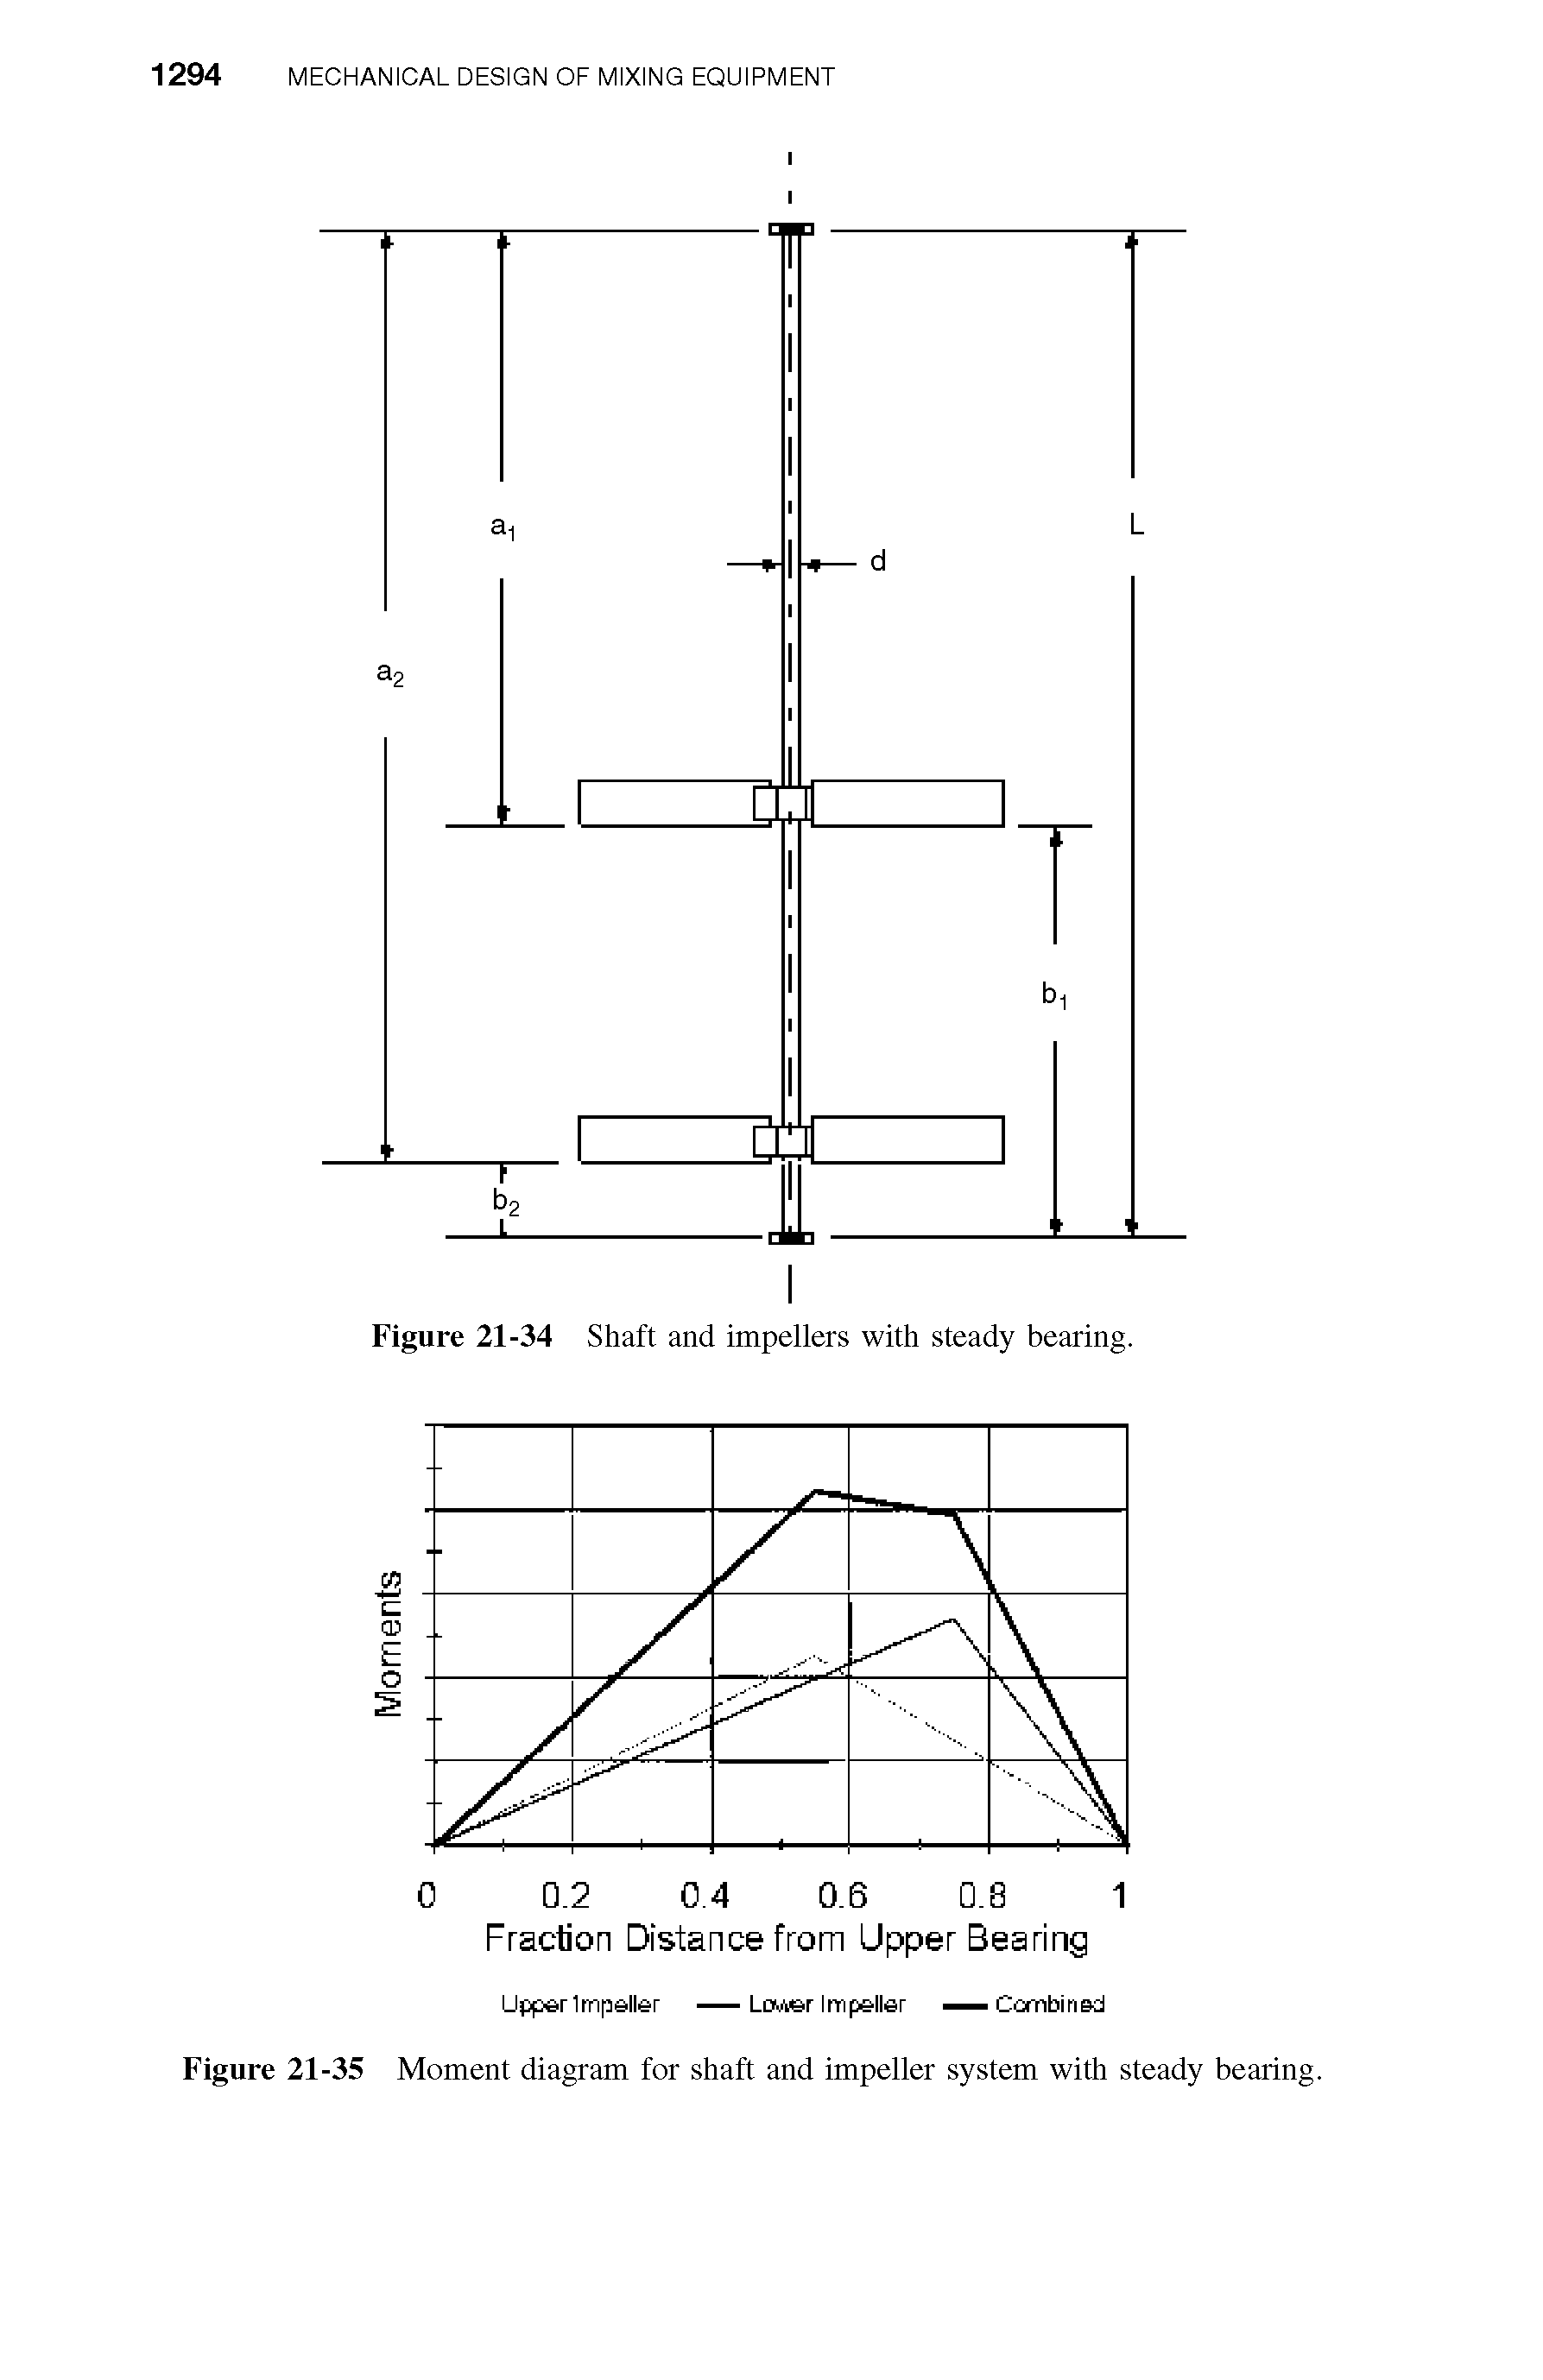 Figure 21-35 Moment diagram for shaft and impeller system with steady bearing.